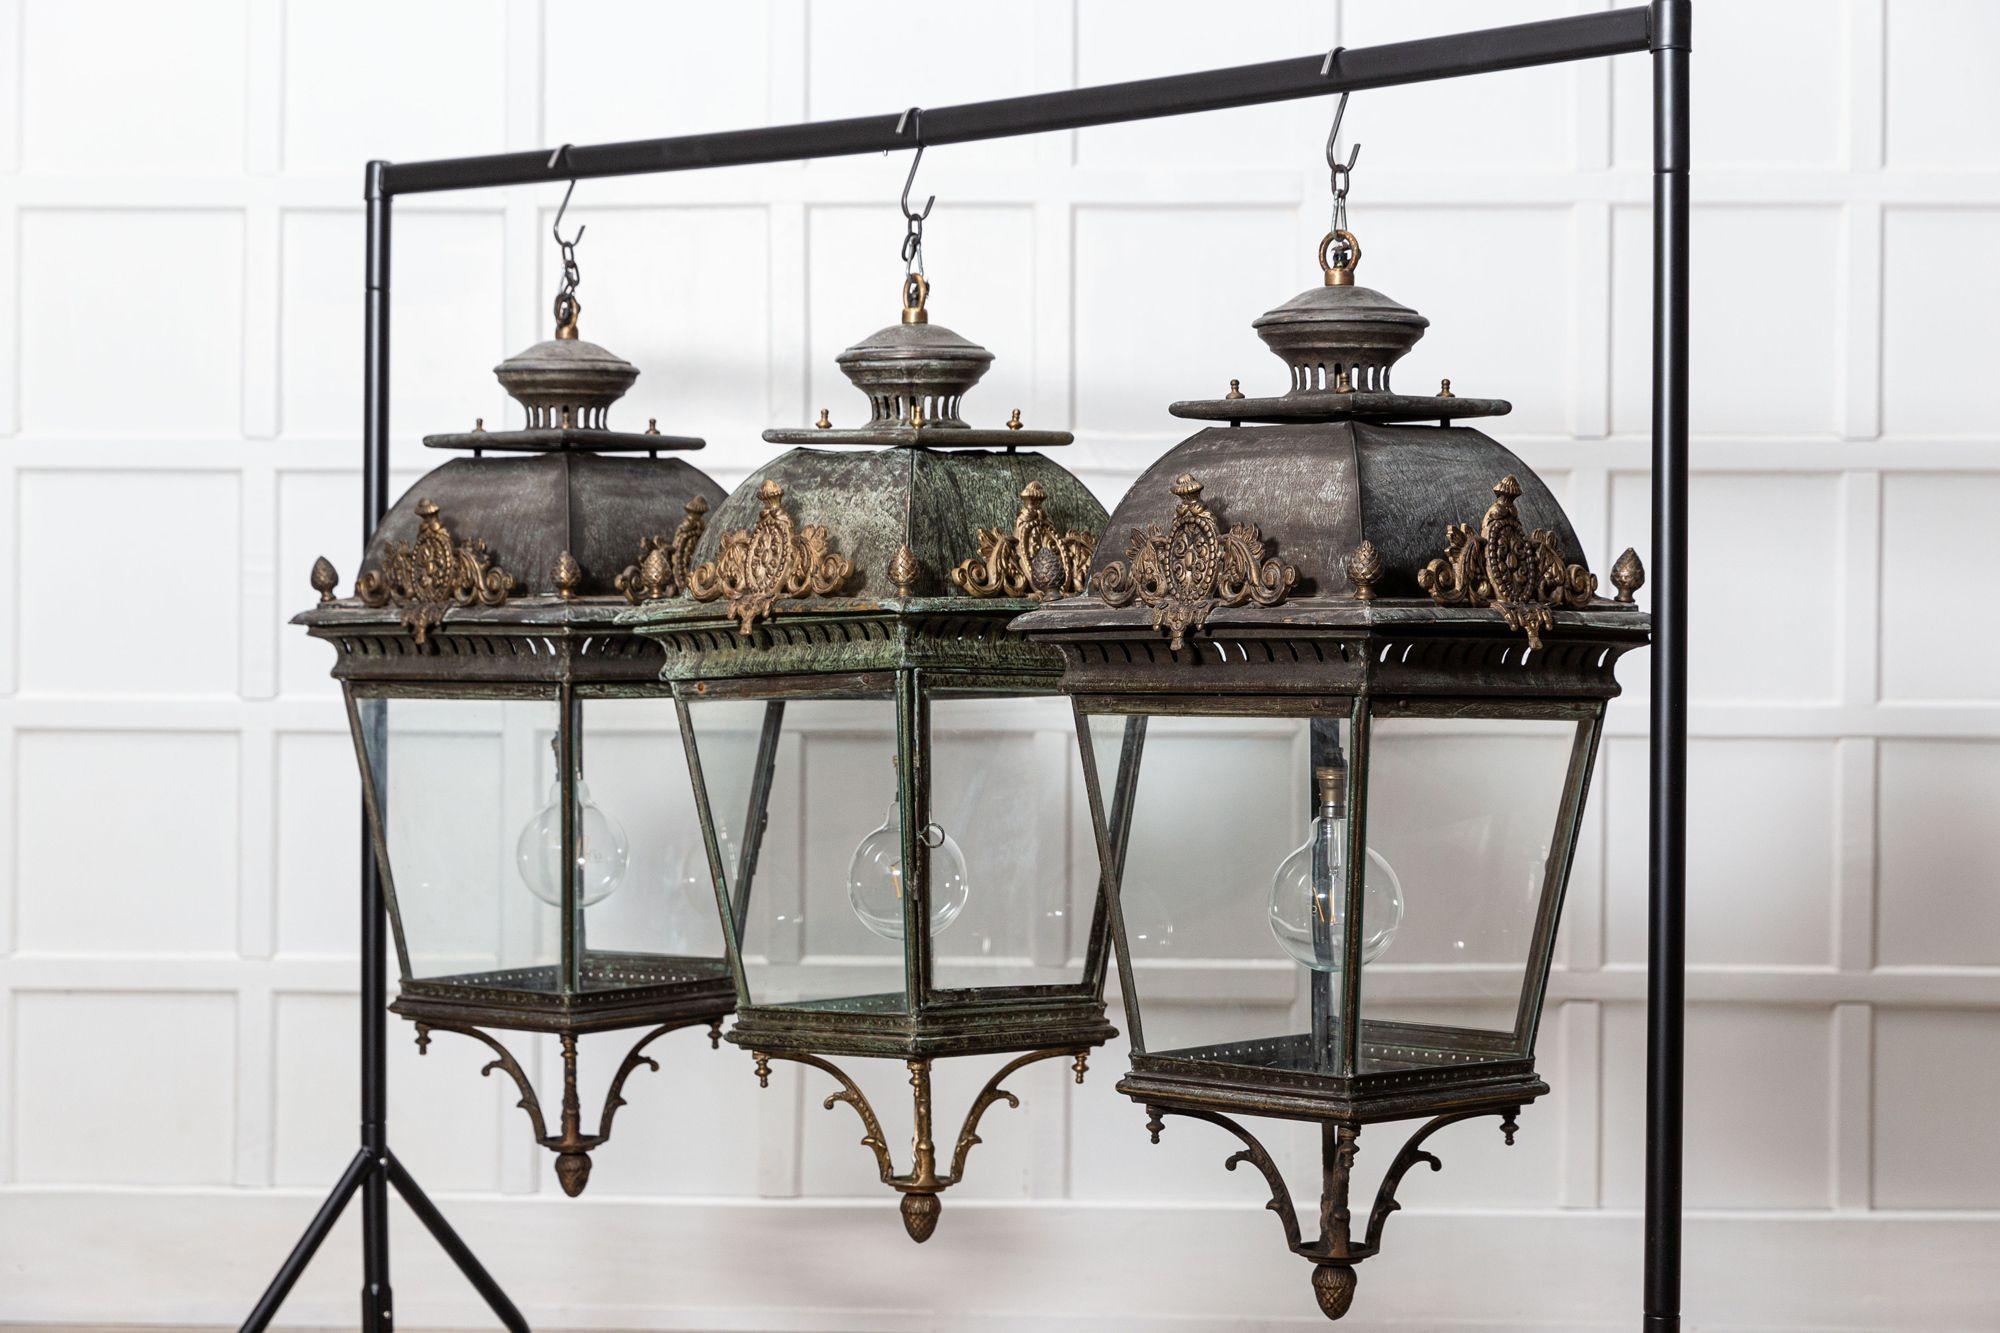 circa Late 20thC

Large French 19thC Style Bronze & Iron Lanterns

X16 available 

Price is each 

W44 x D44 x H105 cm.